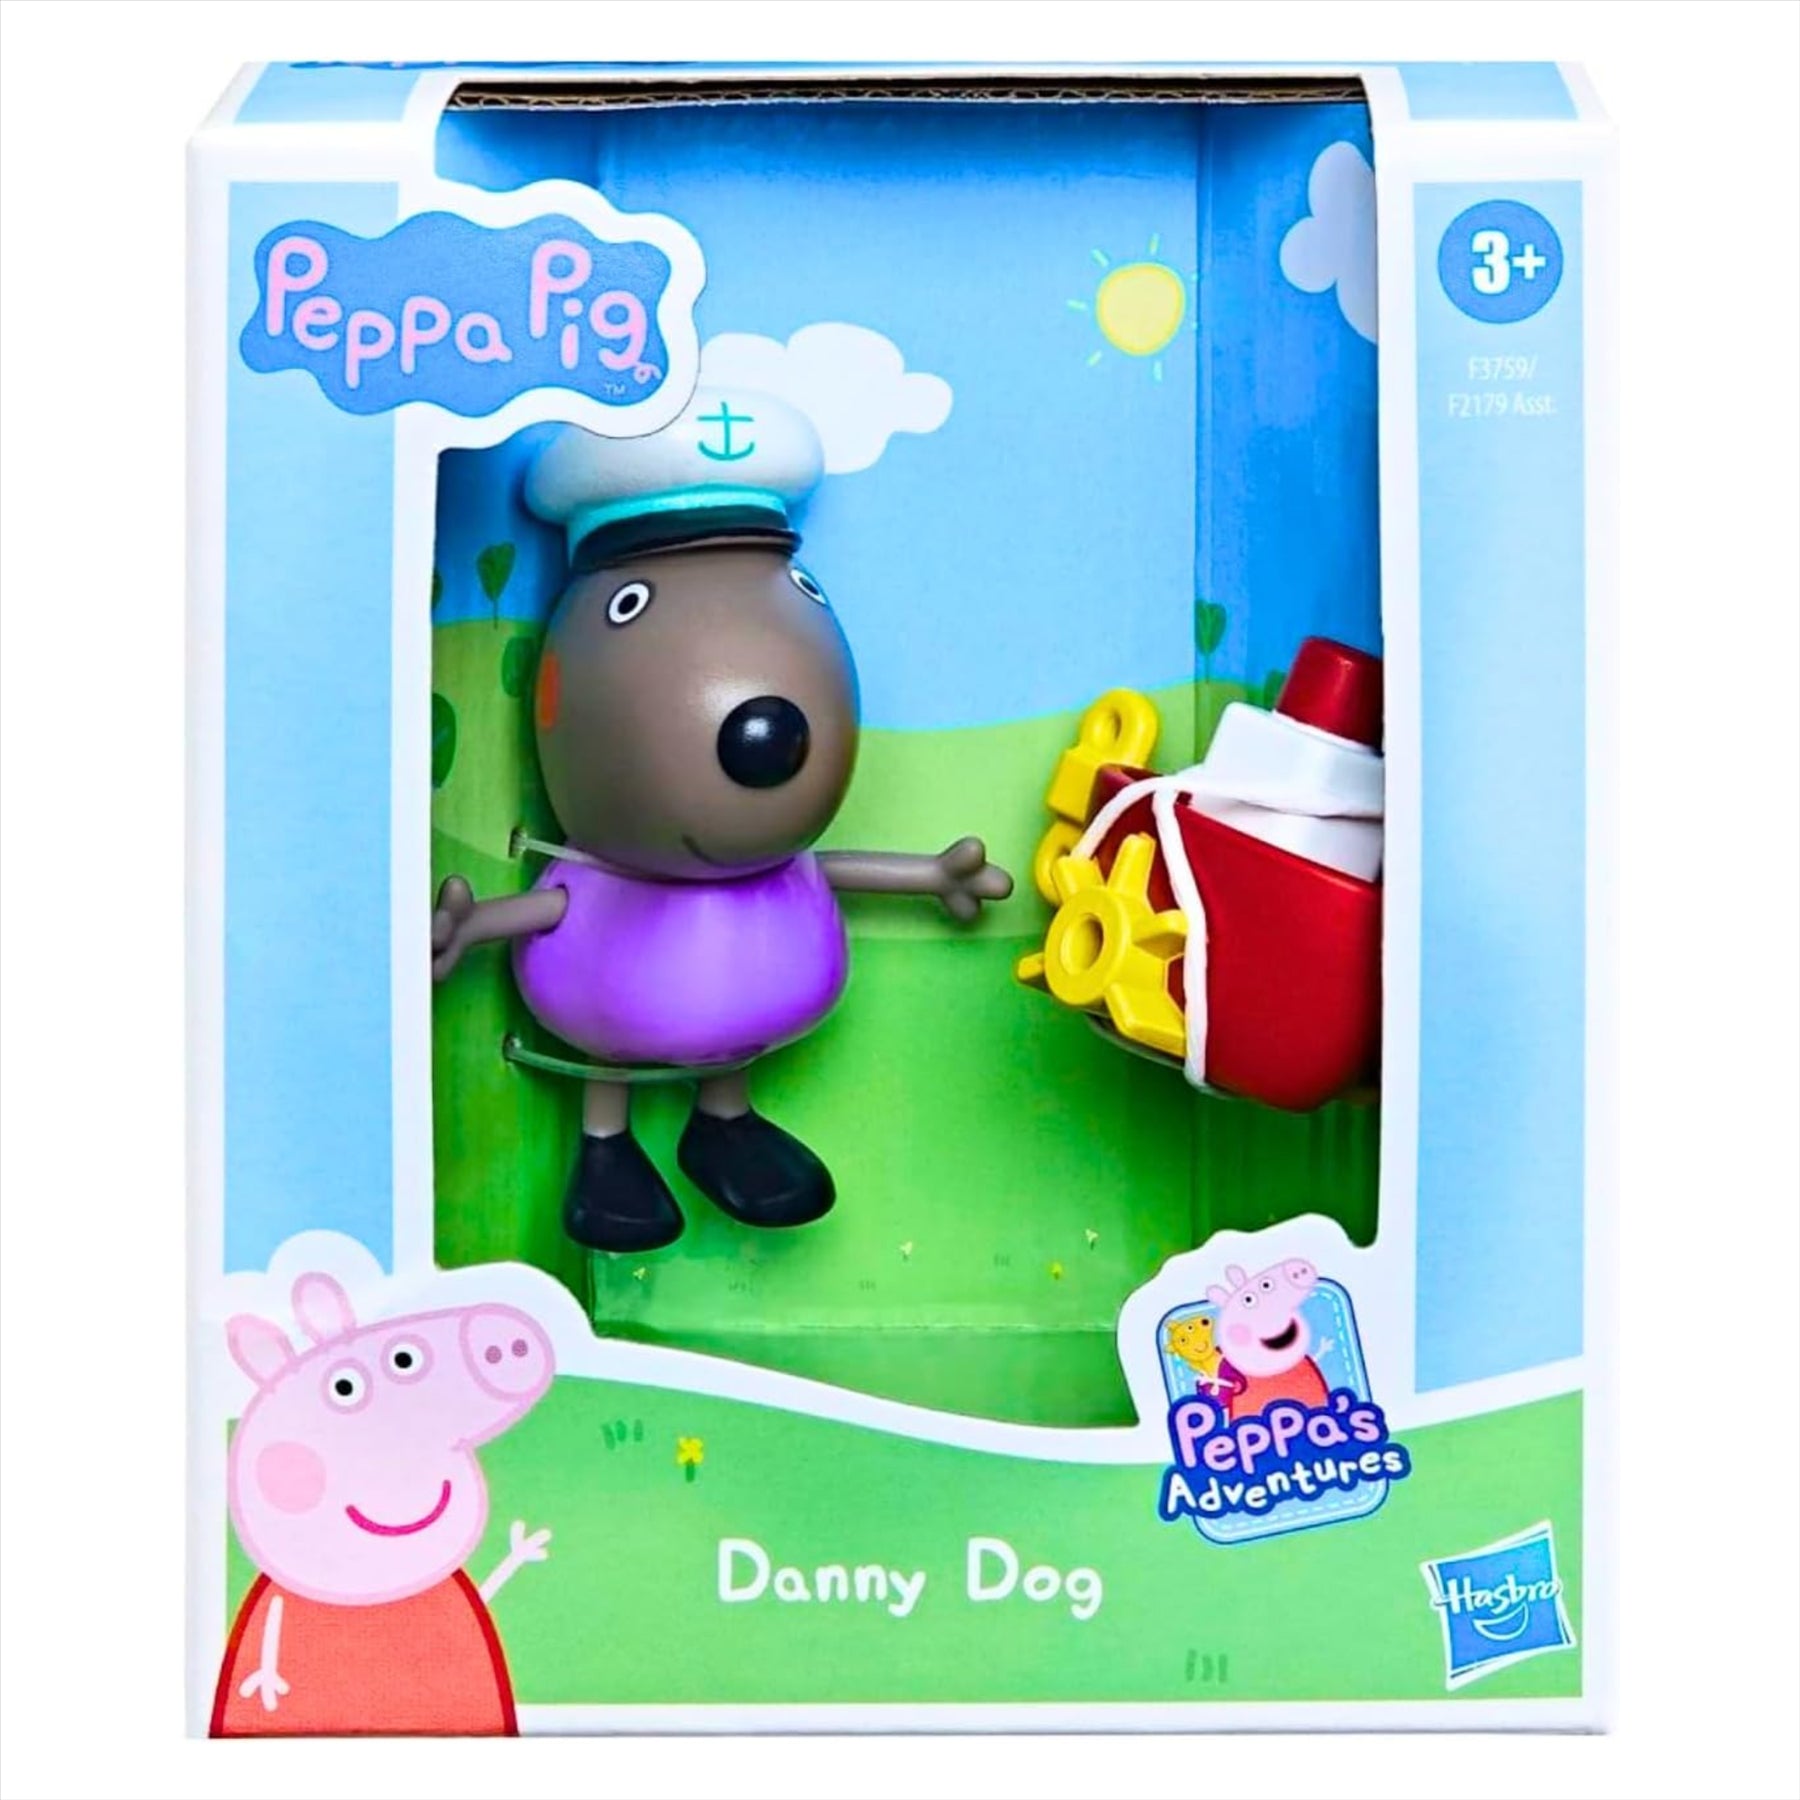 Peppa Pig - 3" 8cm Articulated Figure & Accessory - Danny Dog & Peppa Pig with Easel 2 Pack - Toptoys2u